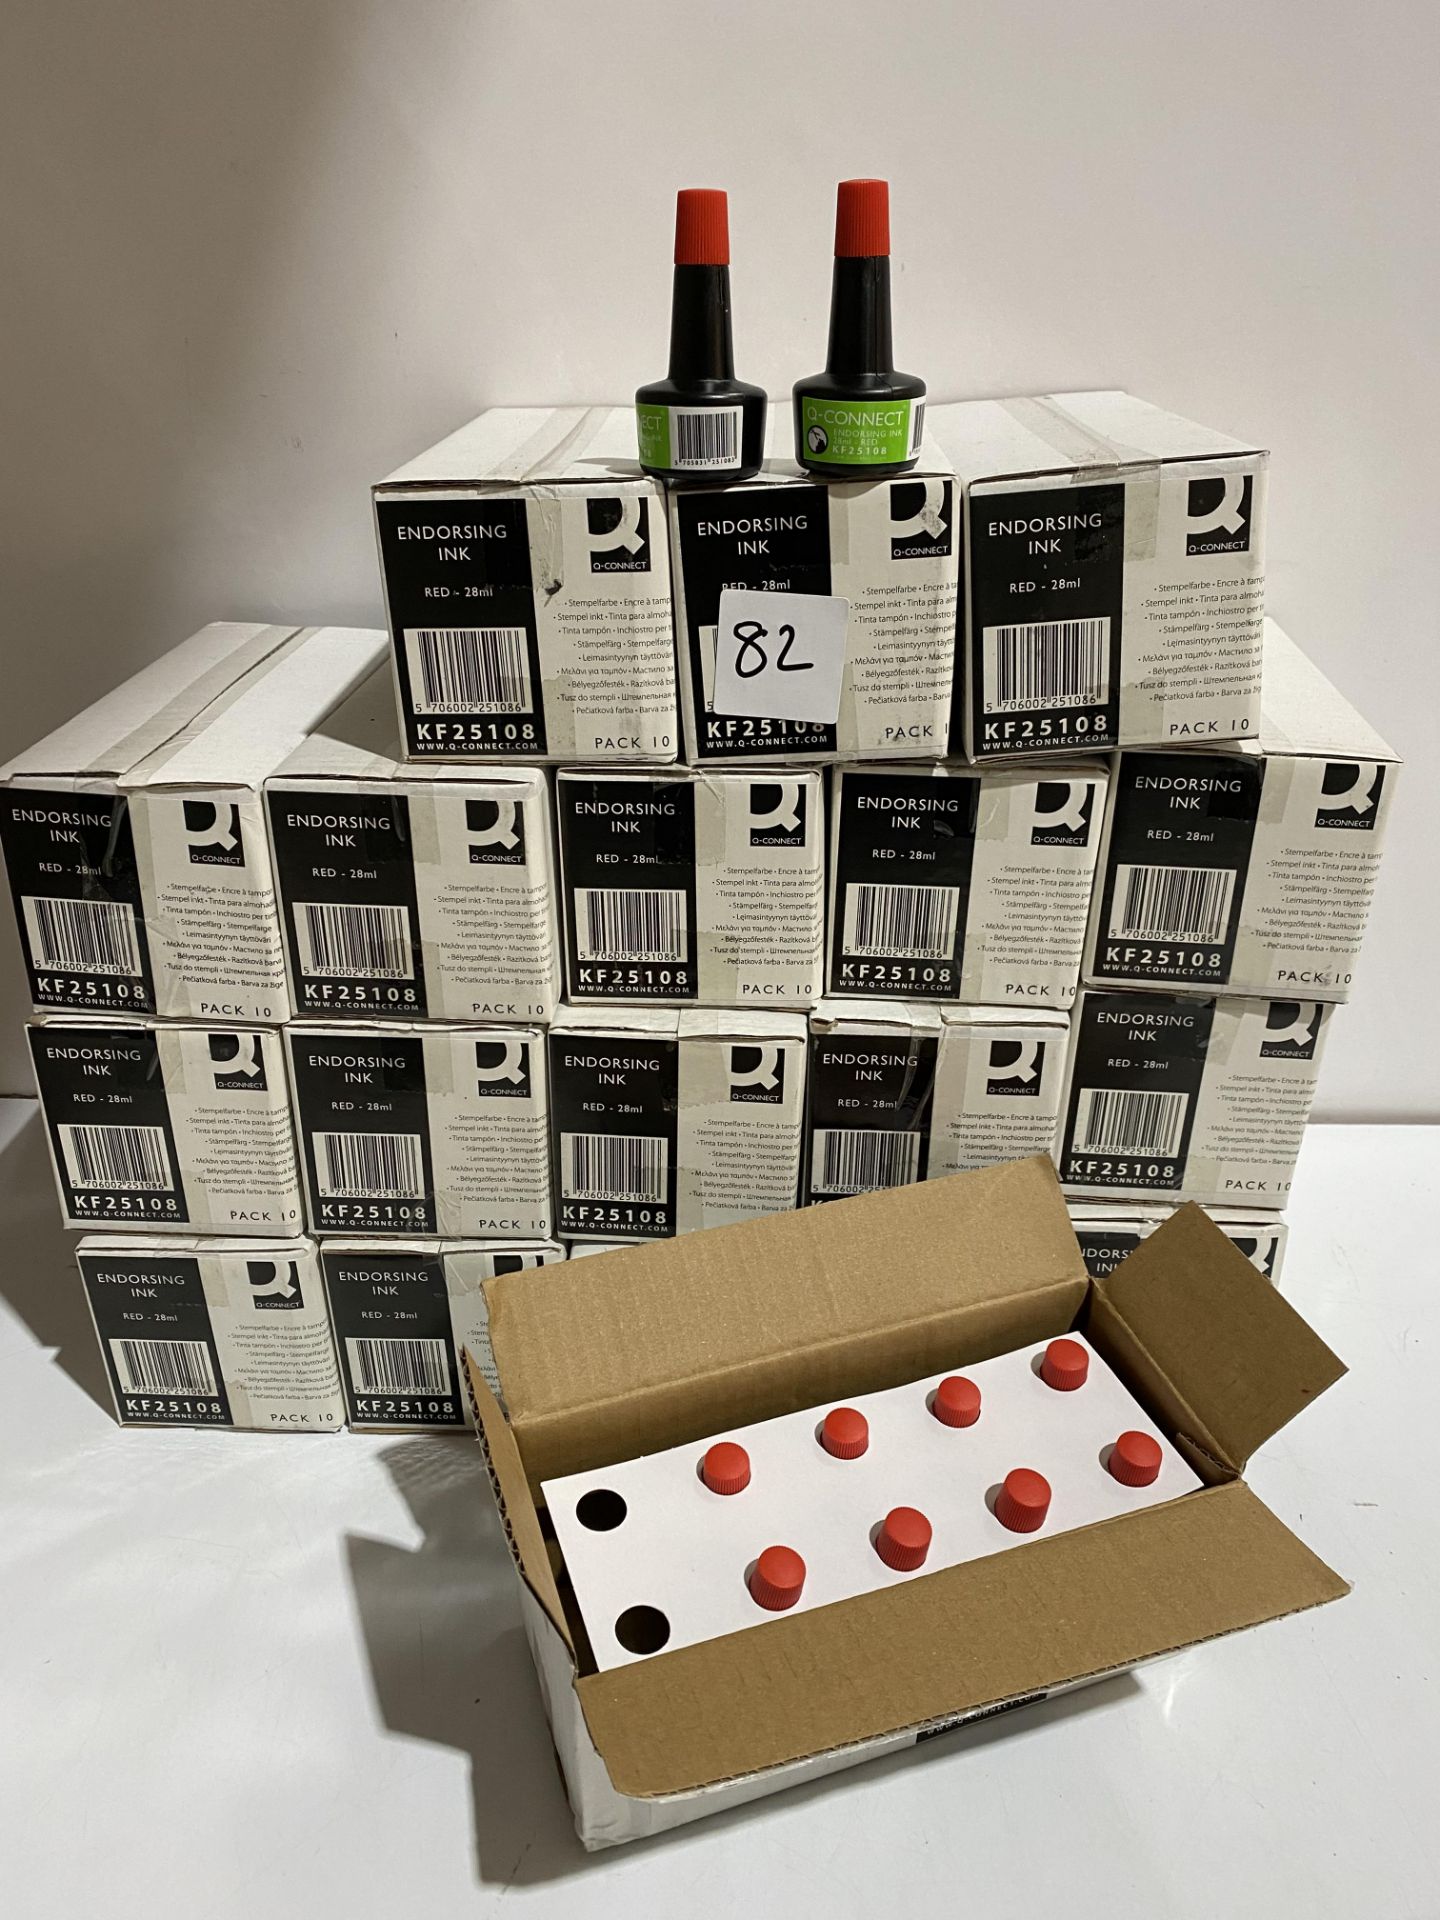 18 x packs of 10 Q-Connect 28ml red endorsing ink